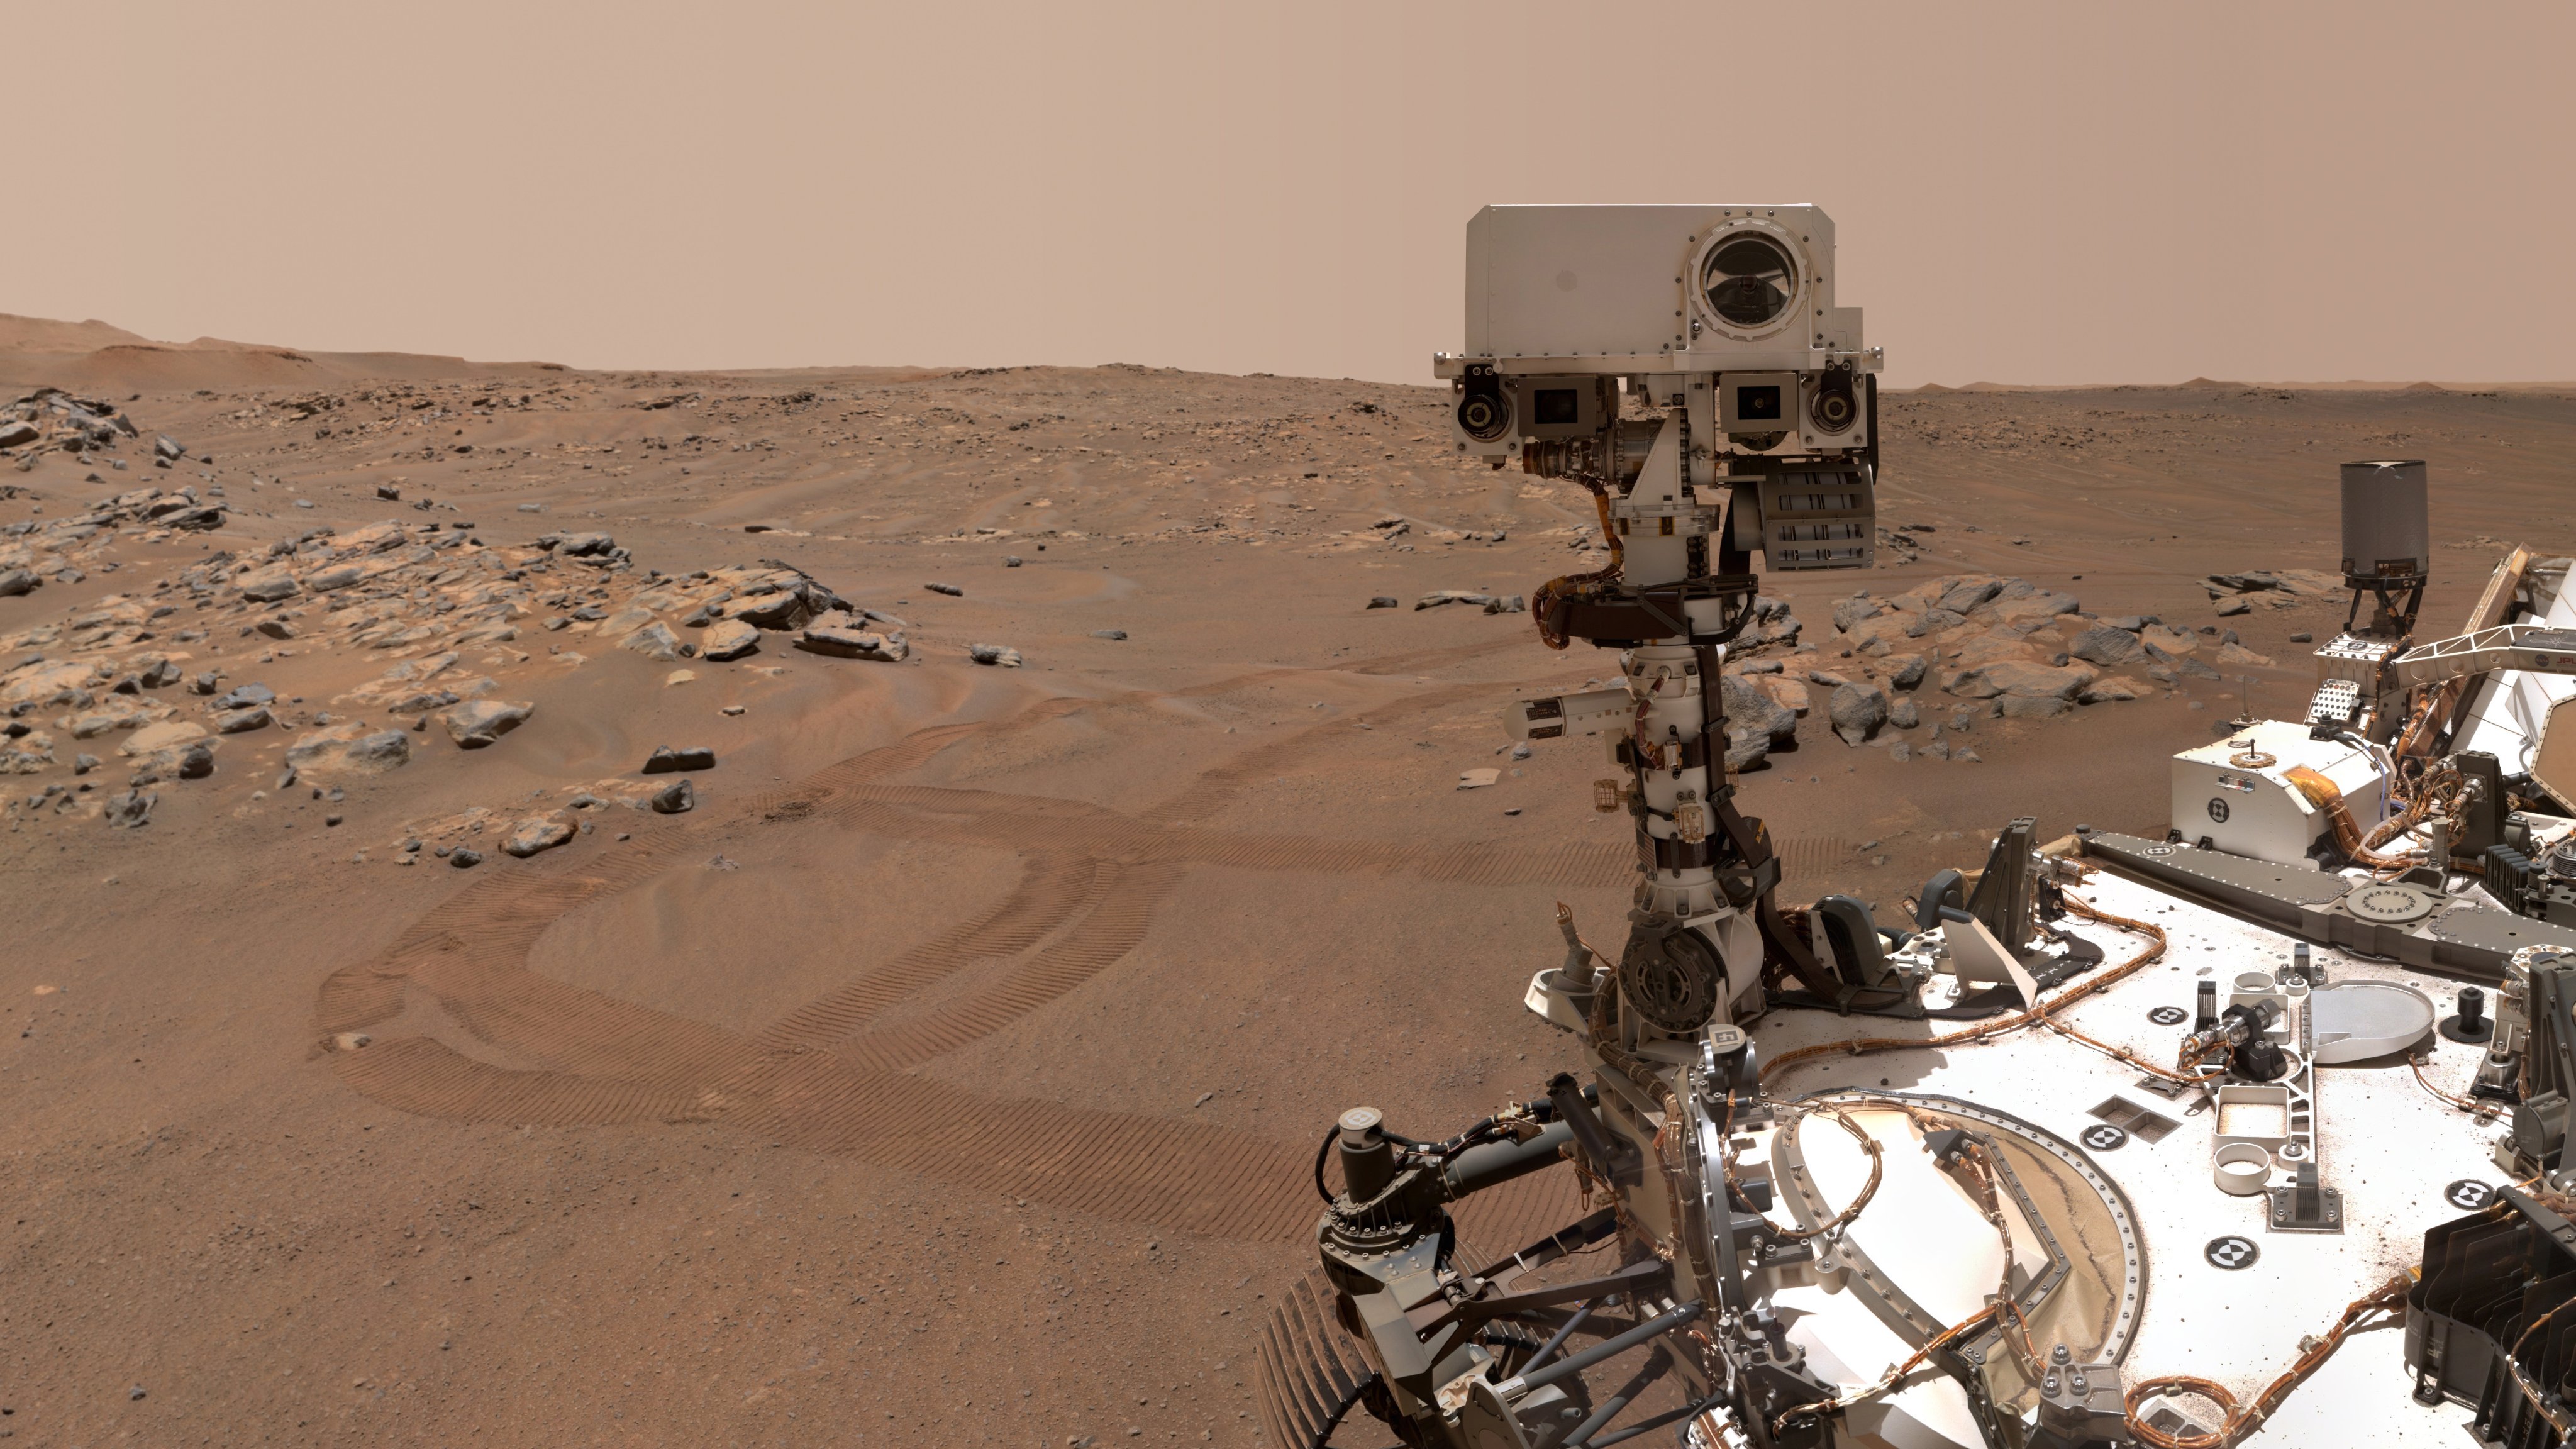 Nine tubes down: First-ever sample depot on Mars is almost complete